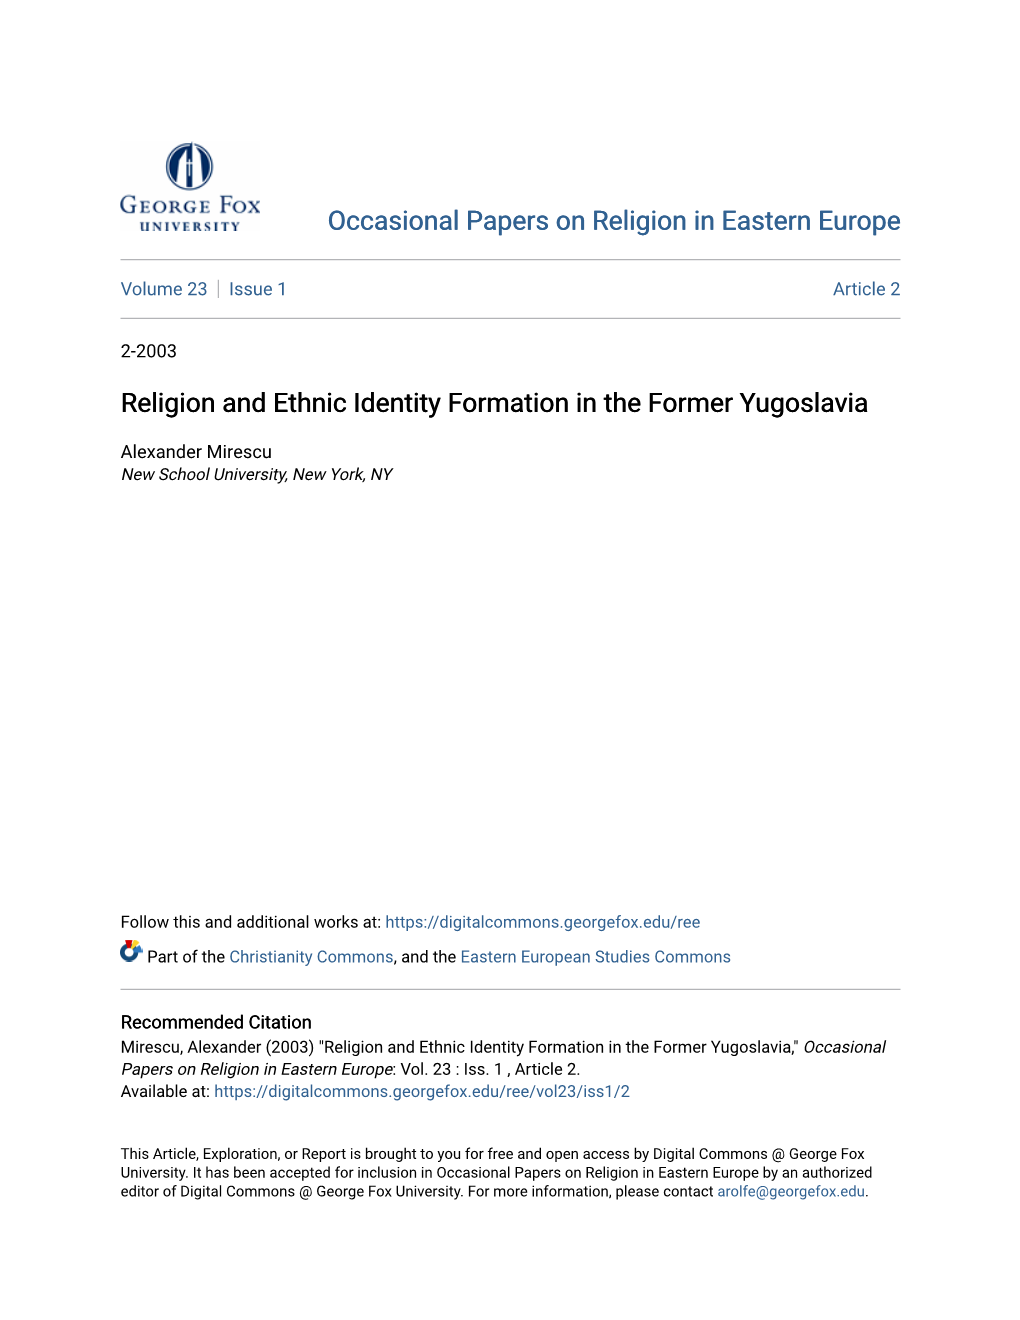 Religion and Ethnic Identity Formation in the Former Yugoslavia